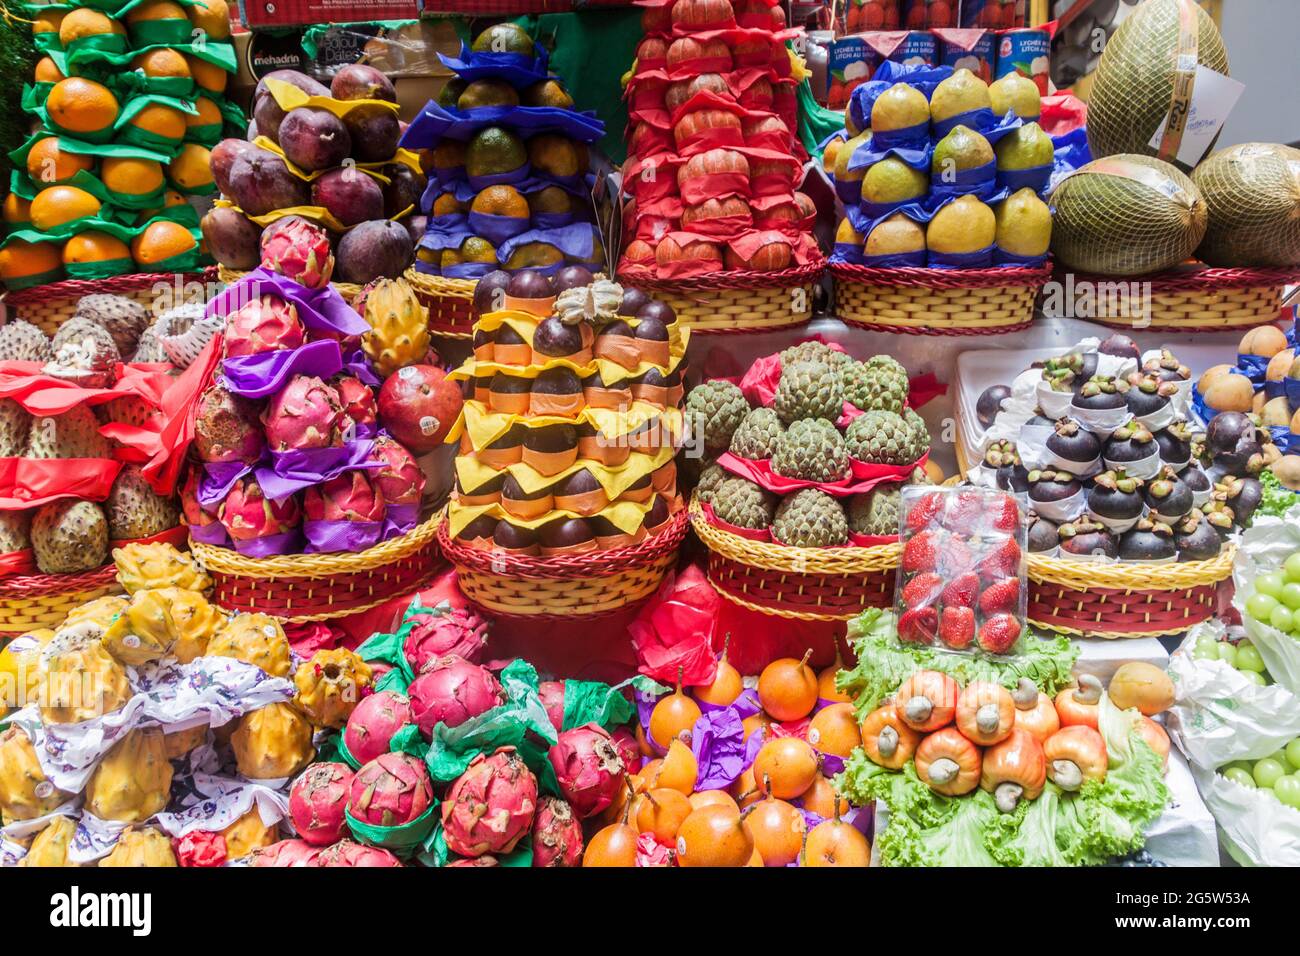 Fruit stacked at a stall in Mercado Municipal market in Sao Paulo, Brazil Stock Photo